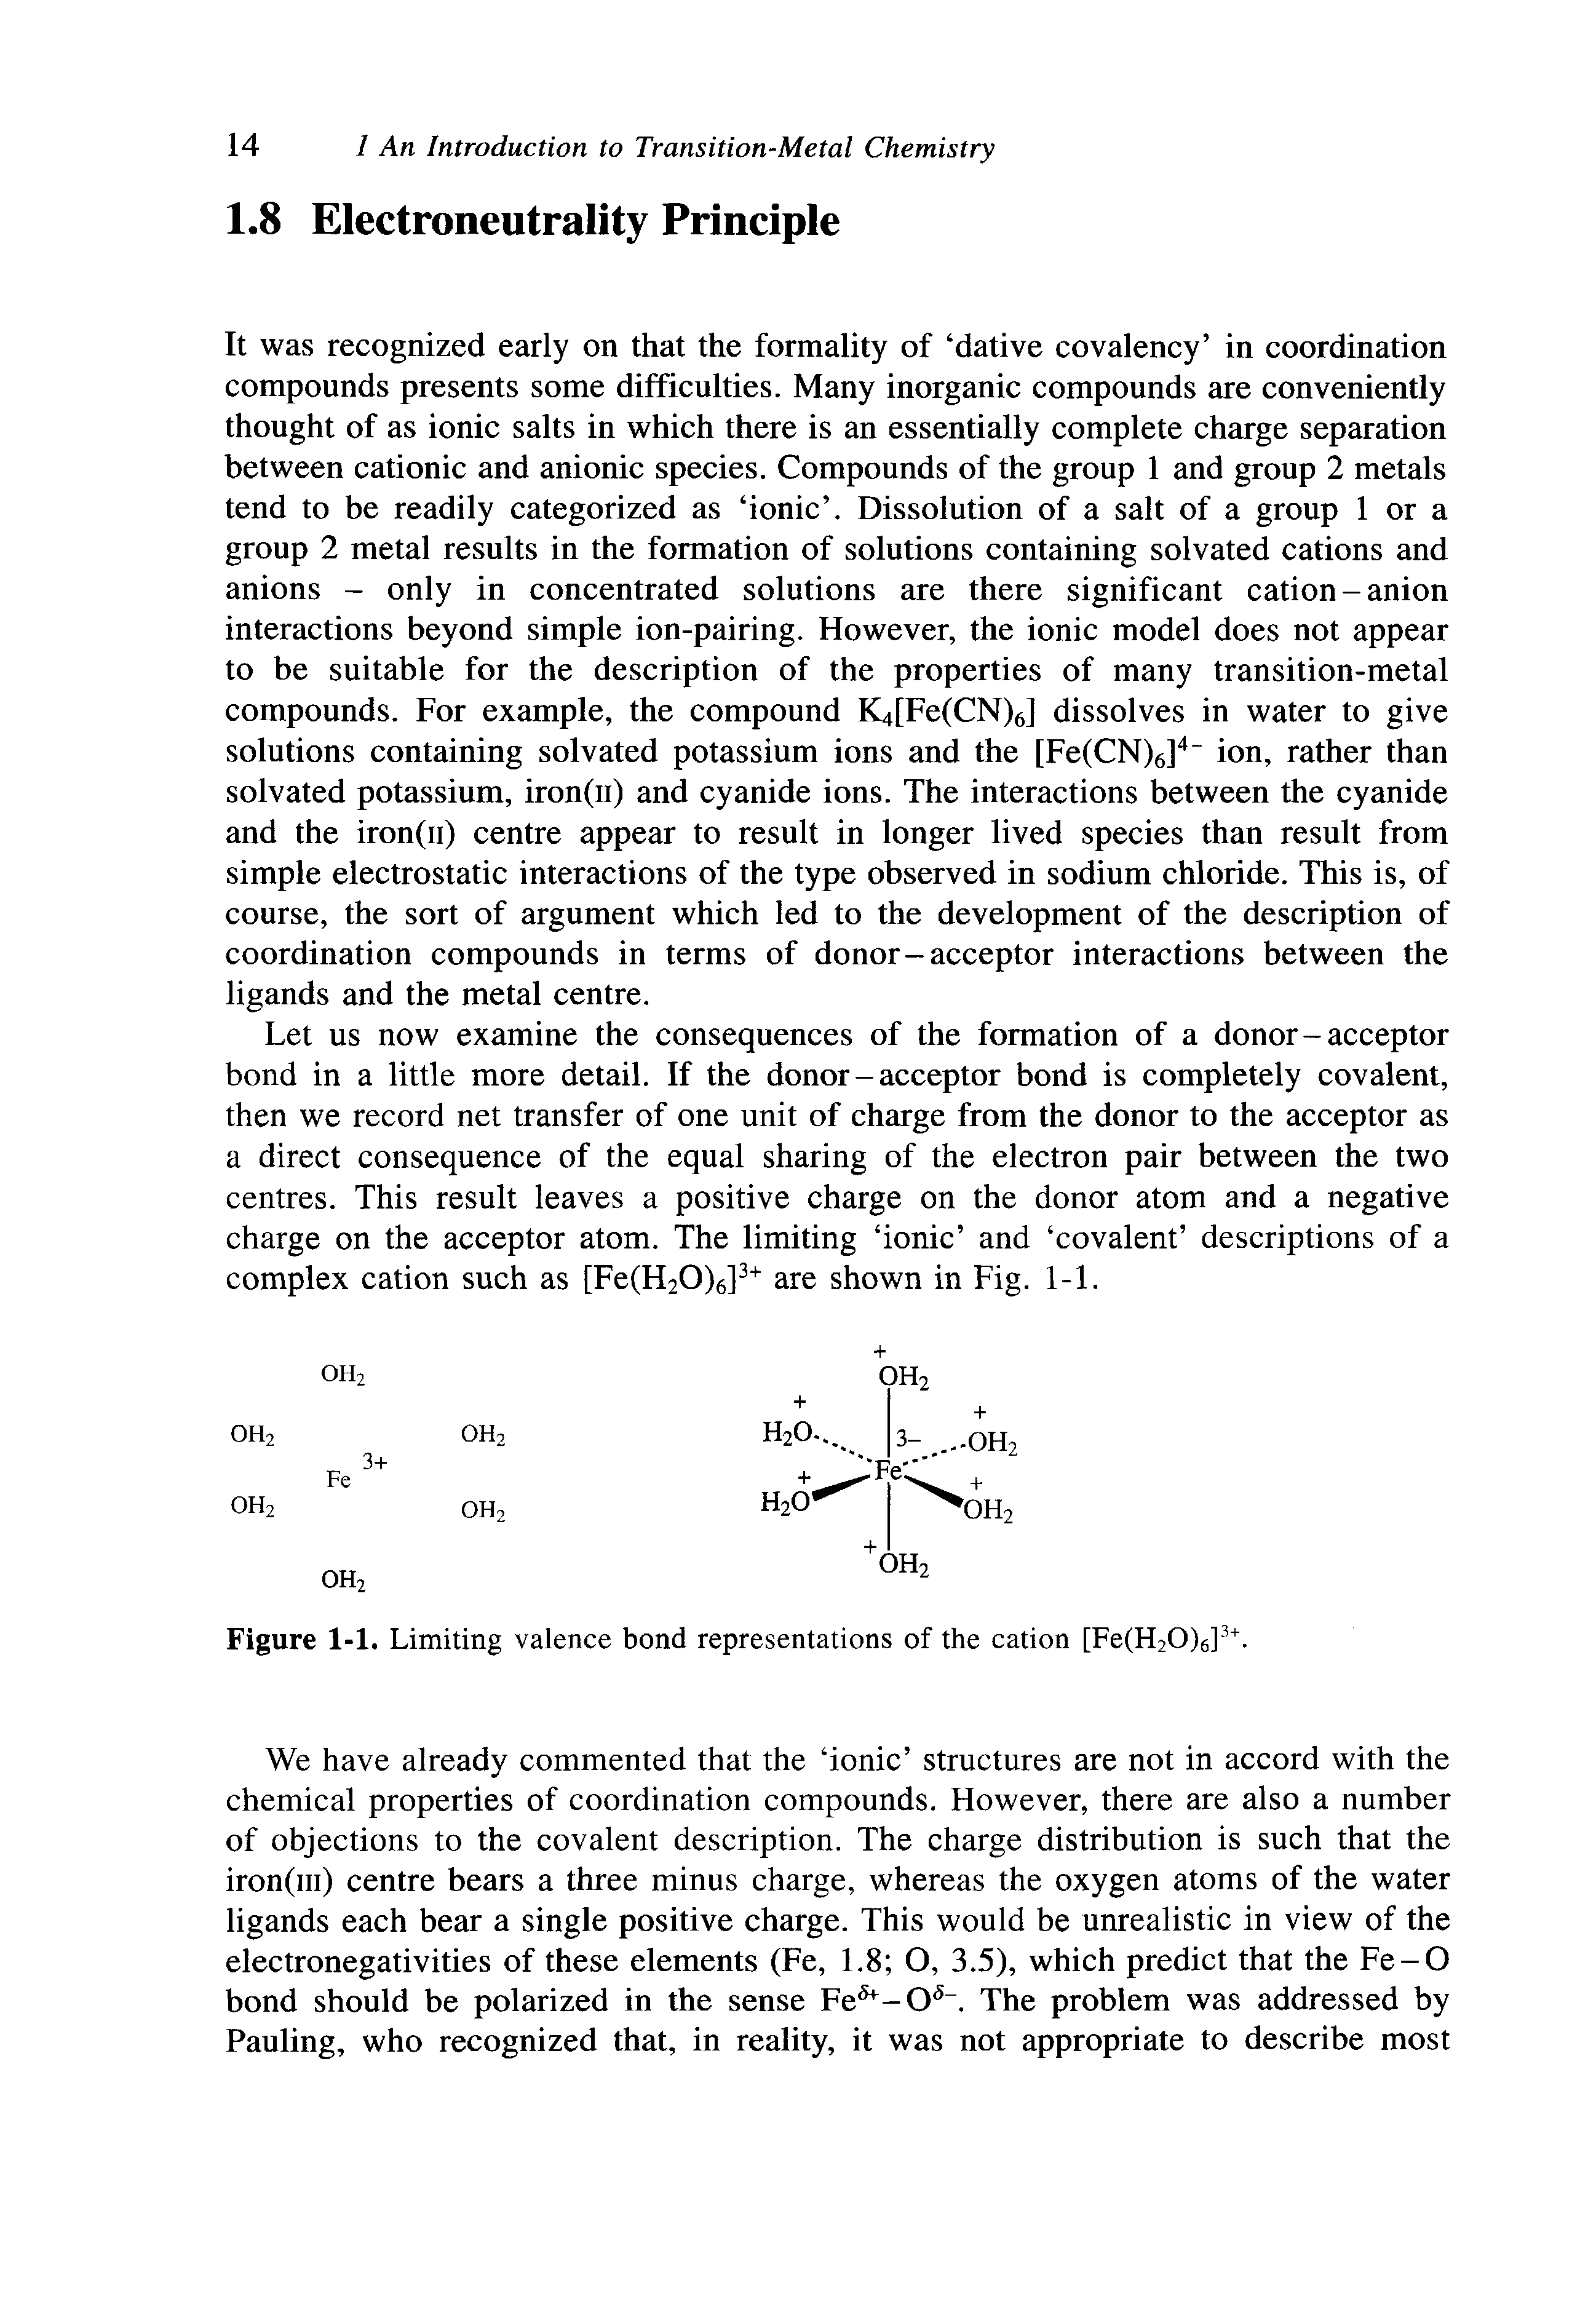 Figure 1-1. Limiting valence bond representations of the cation [Fe(H20)6]. ...